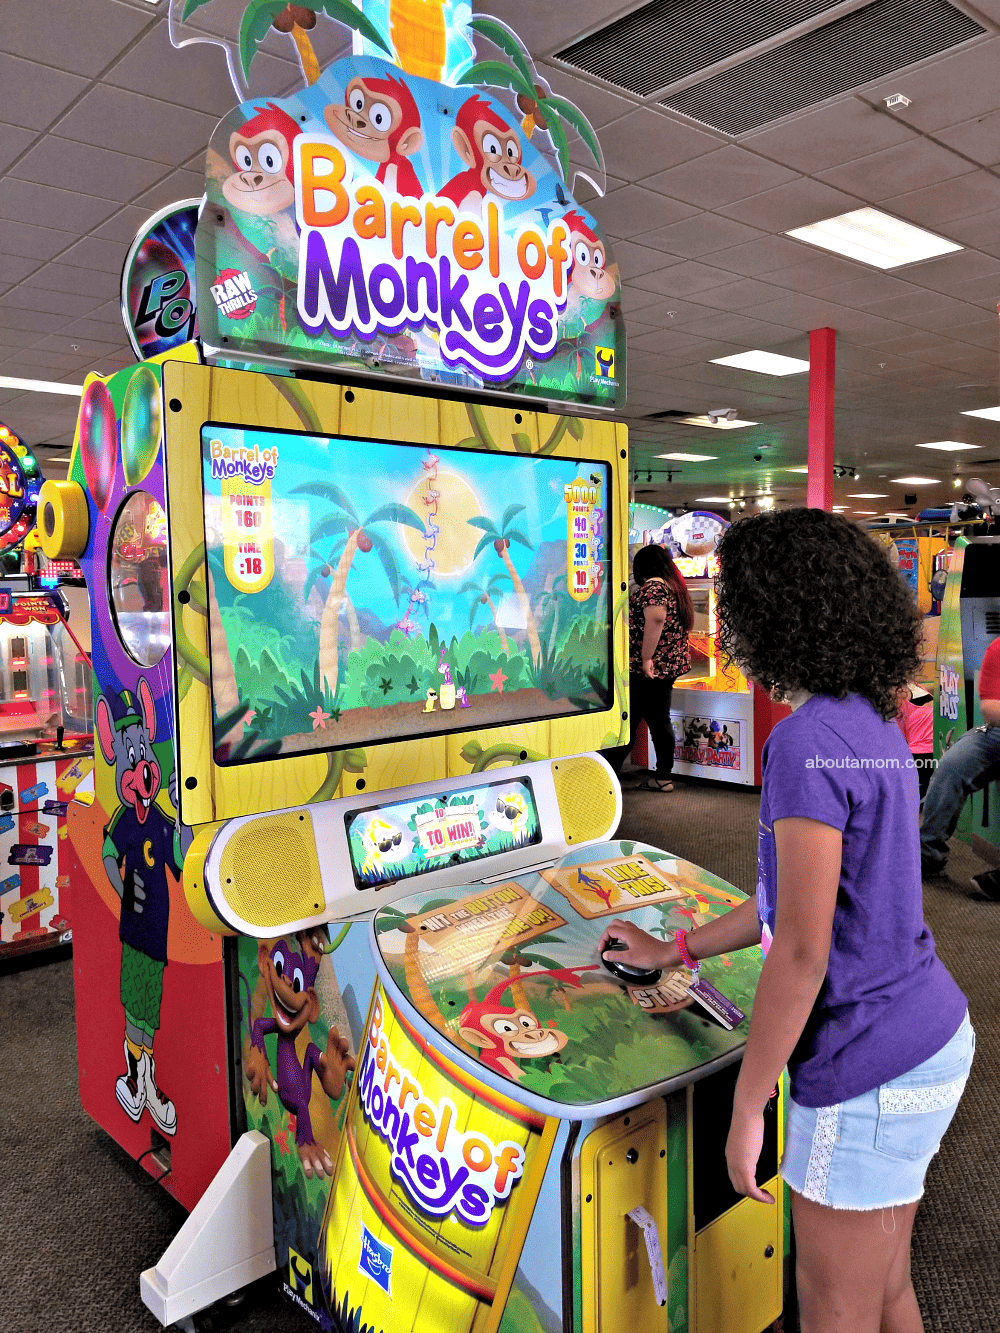 Now through March 11, Chuck E. Cheese’s is once again hosting its Rip It, Win it instant win game and everyone's a winner! Chuck E. Cheese's Rip It Win It Instant Win Game is just one more reason to head over to Chuck E. Cheese's for some family fun. 